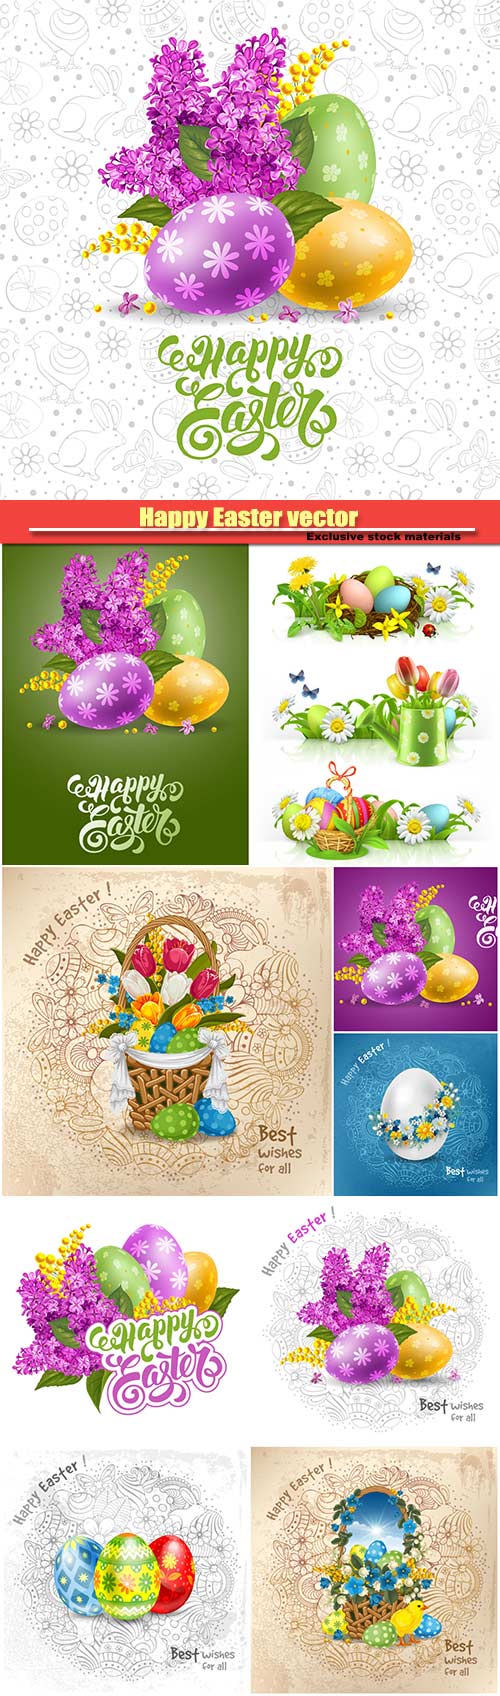 Happy Easter holiday vector backgrounds